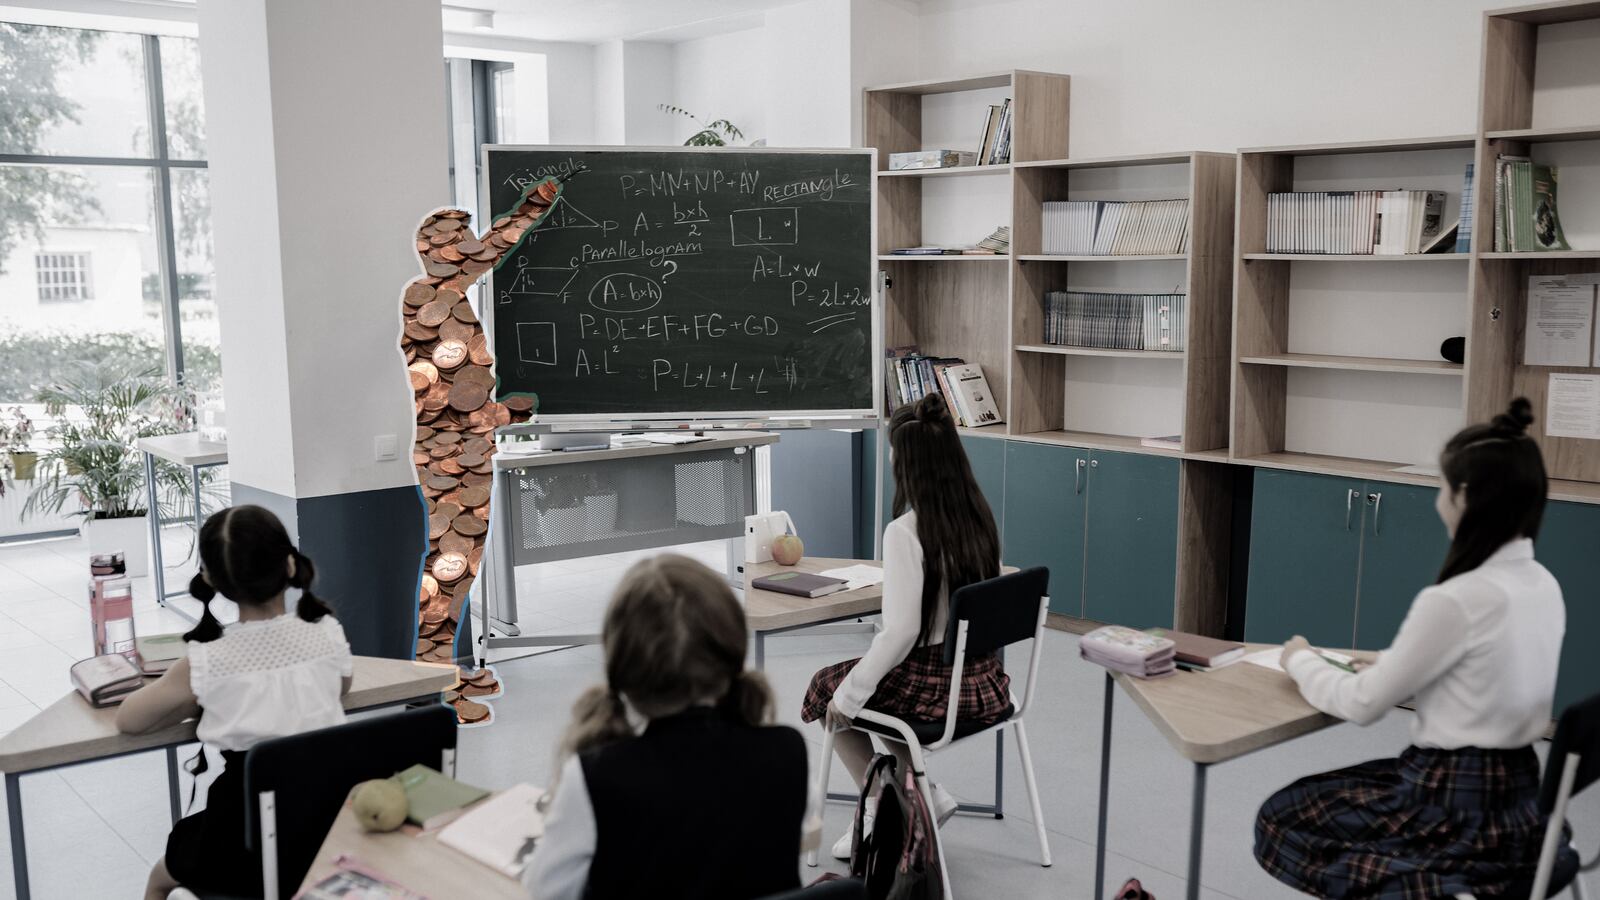 A photo collage showing a teacher standing at a blackboard, his silhouette filled with pennies.